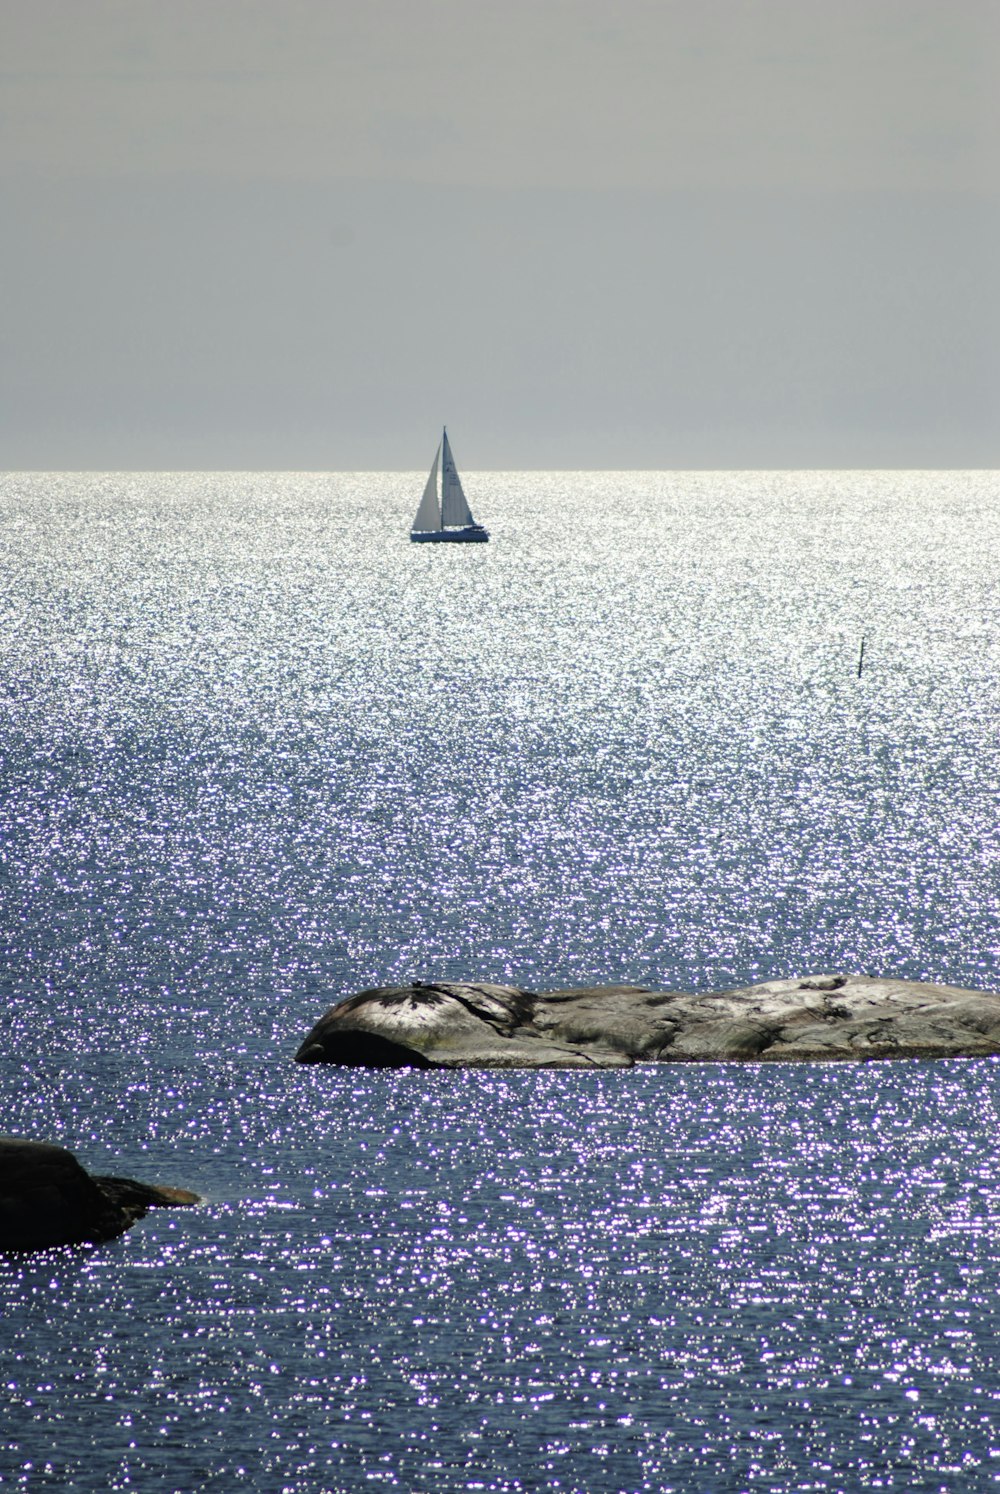 a sailboat is in the distance on the water